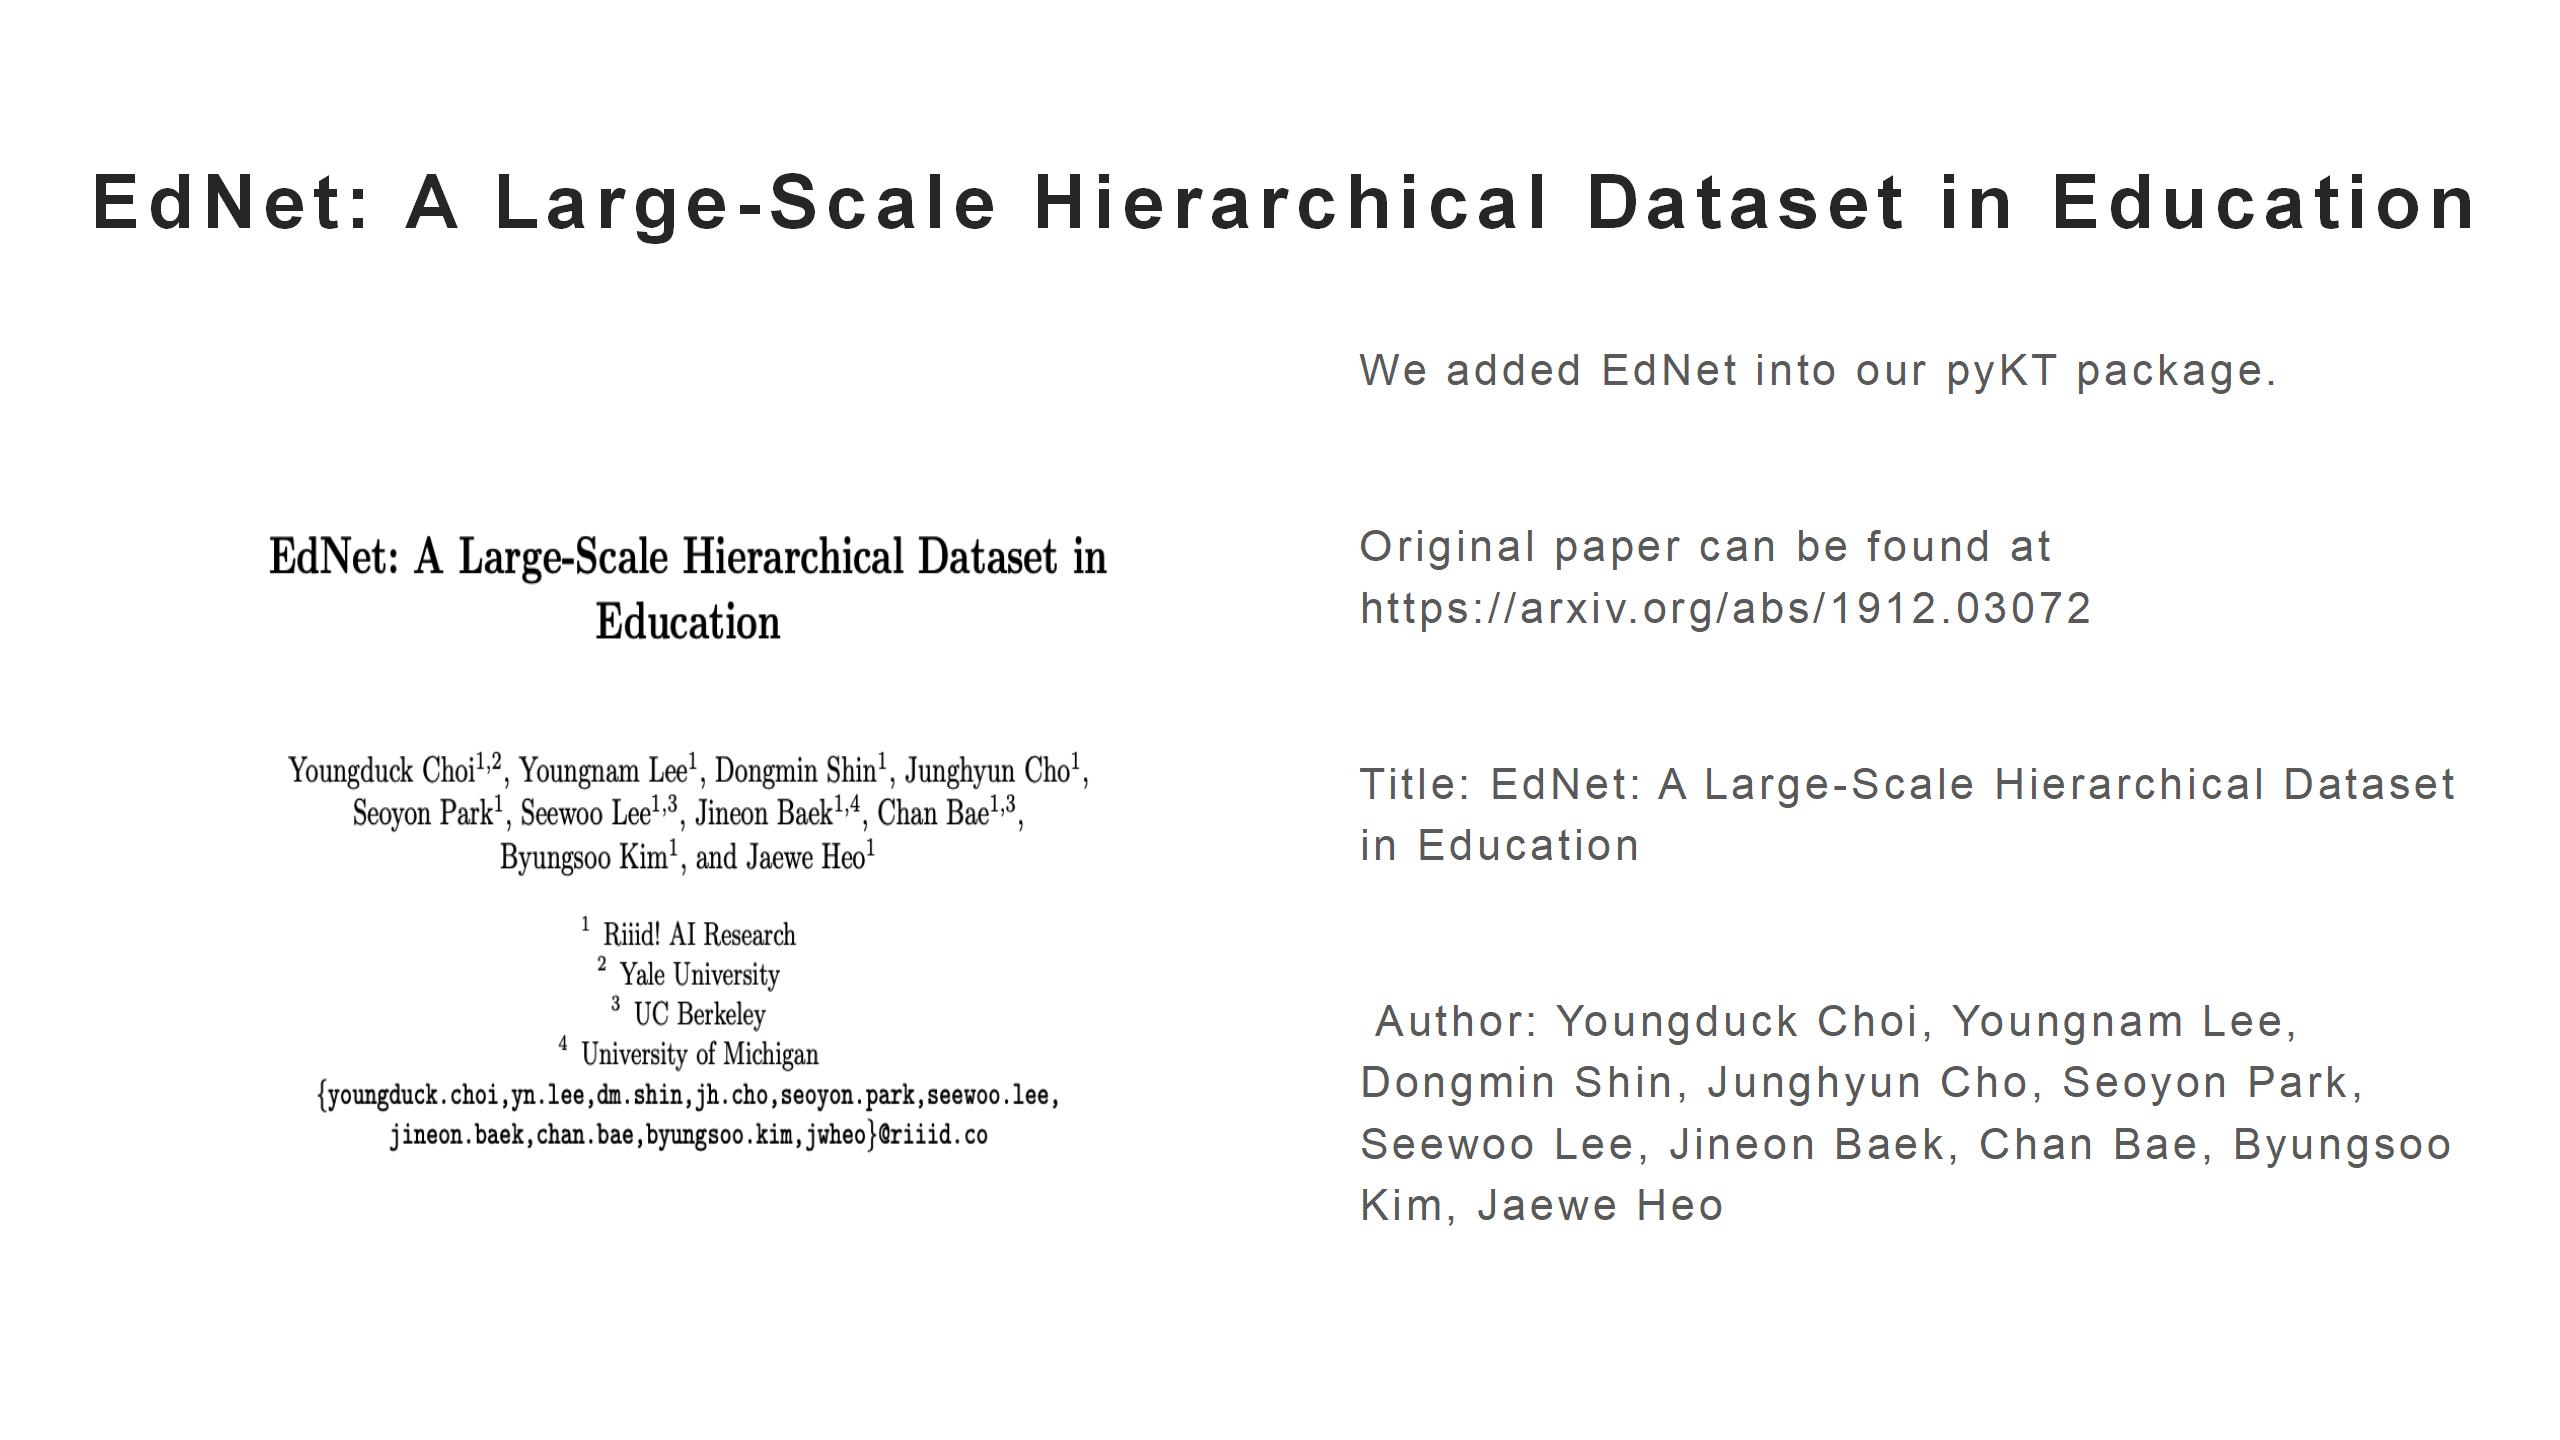 EdNet: A Large-Scale Hierarchical Dataset in Education